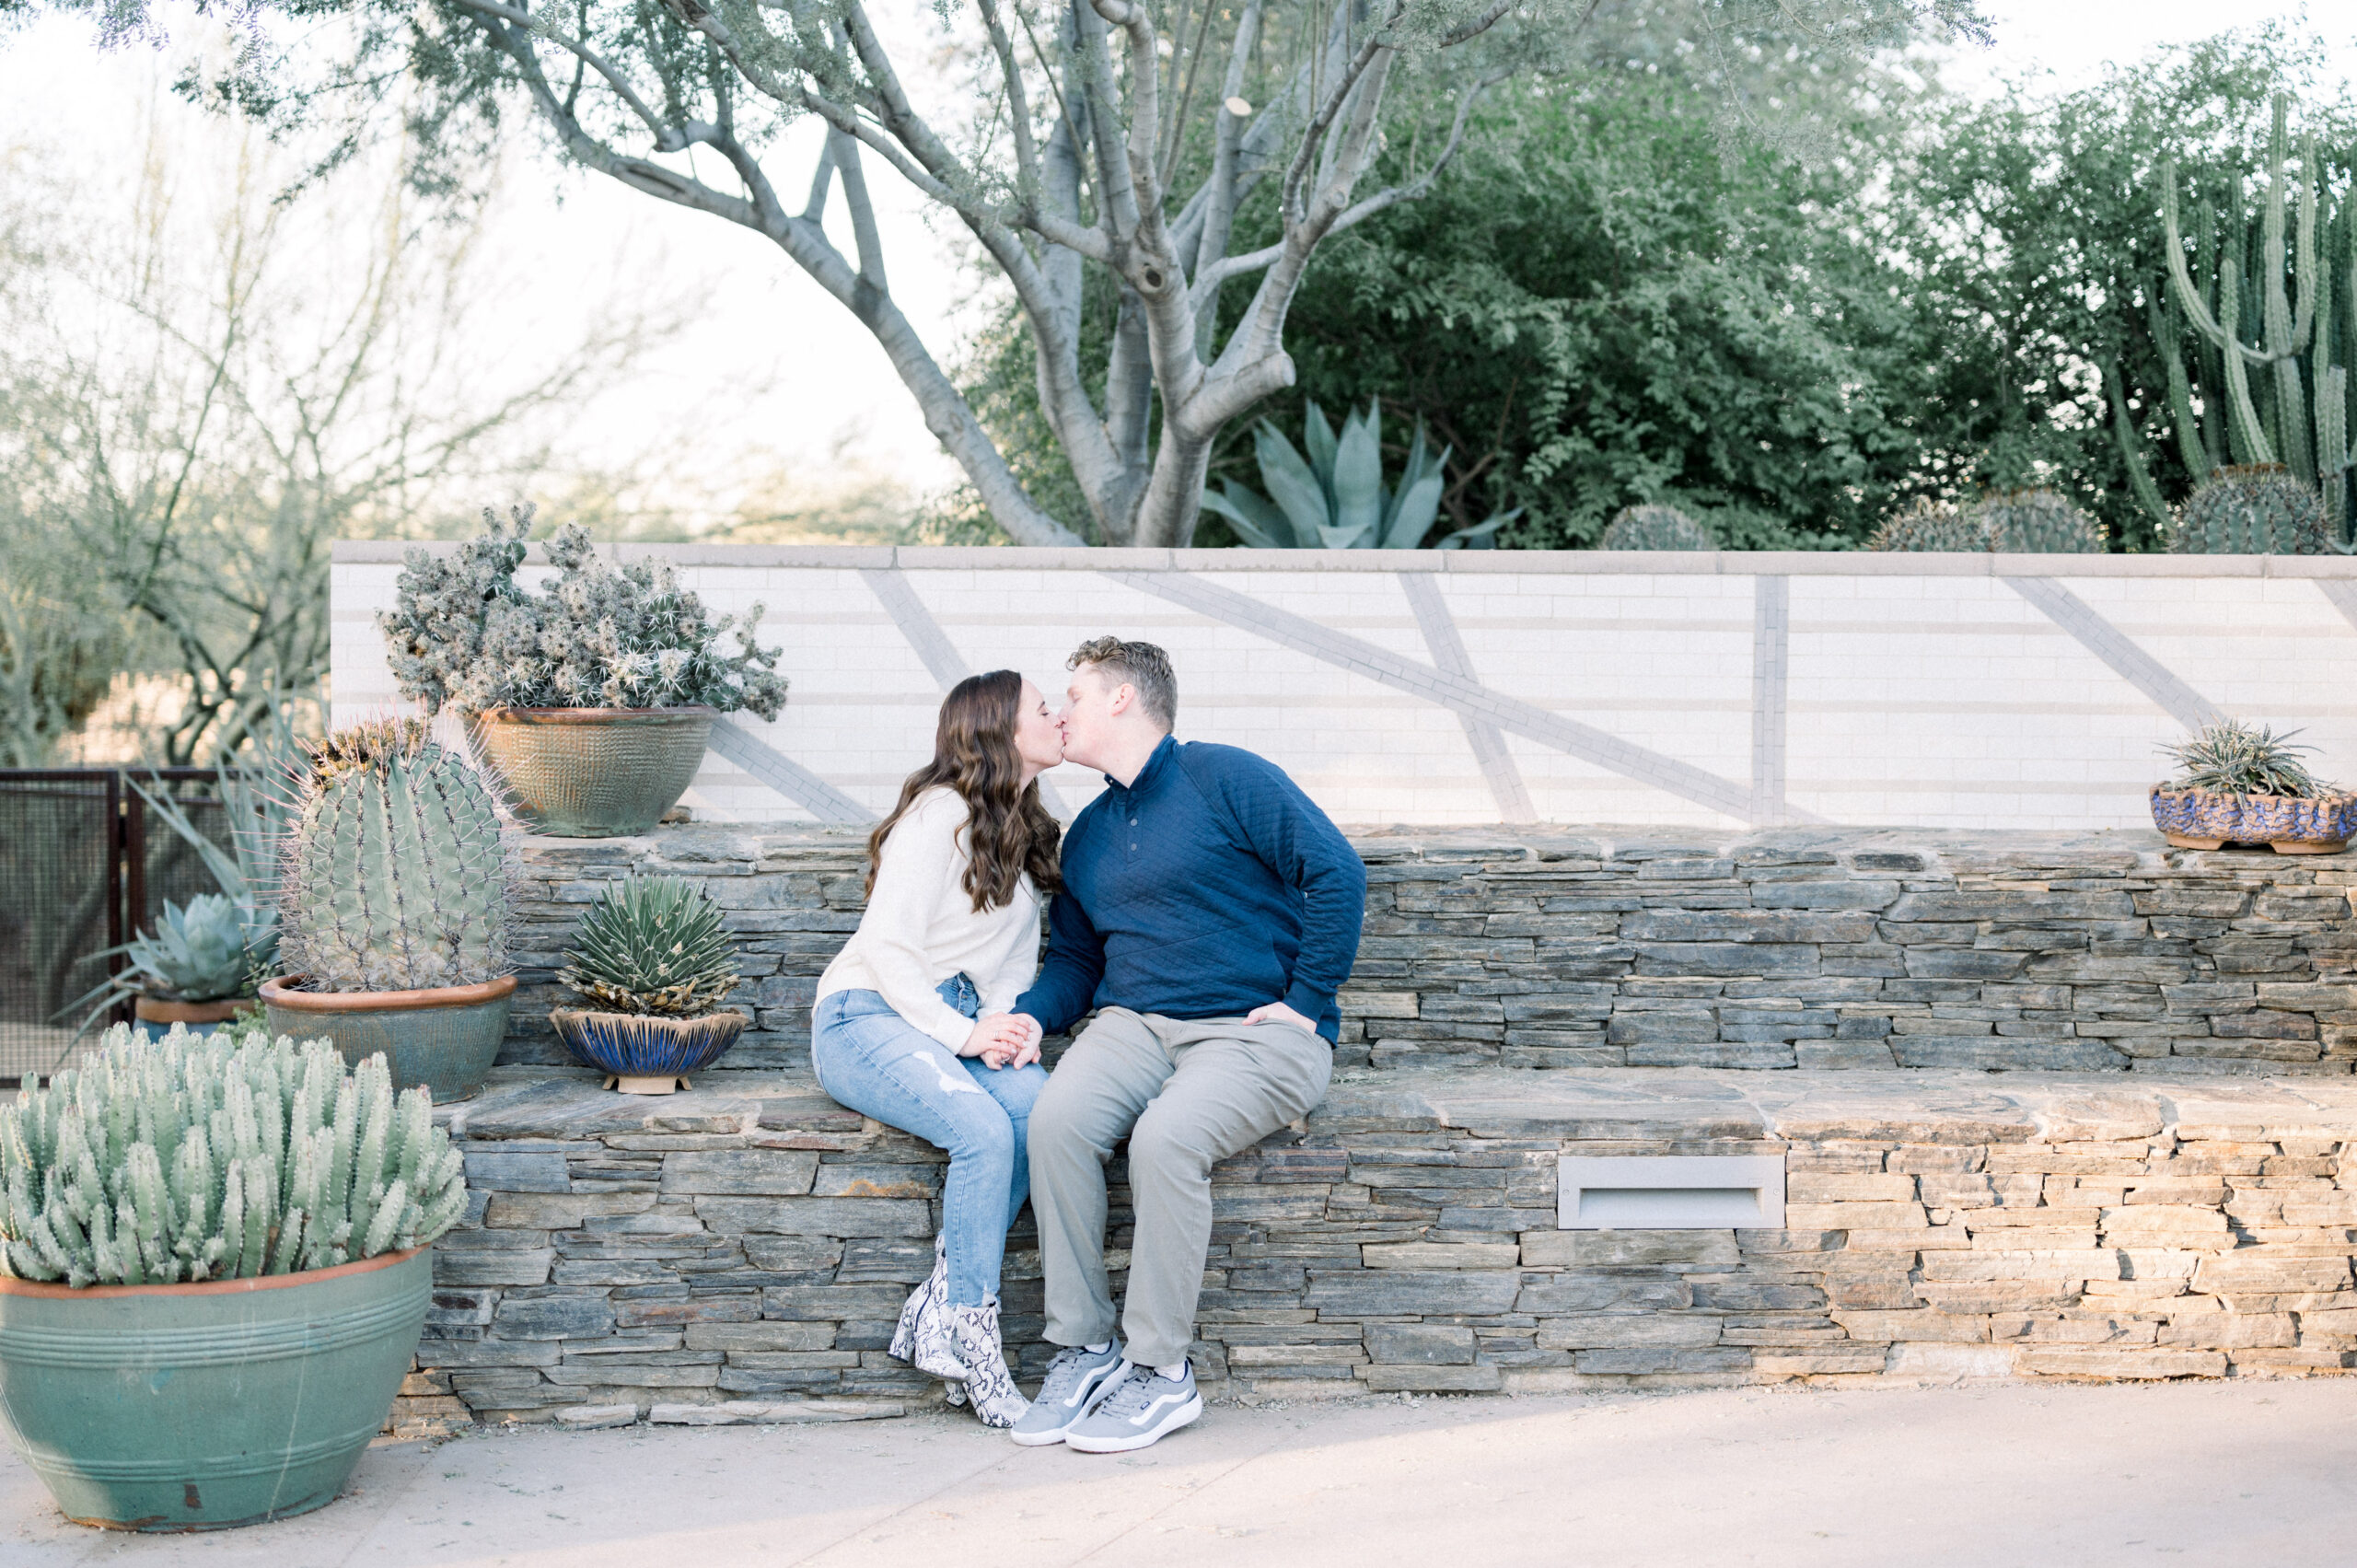 Taylor and Bens sunrise Phoenix Desert Botanical Gardens Engagement Session was so stunning and definitely a favorite session of mine!